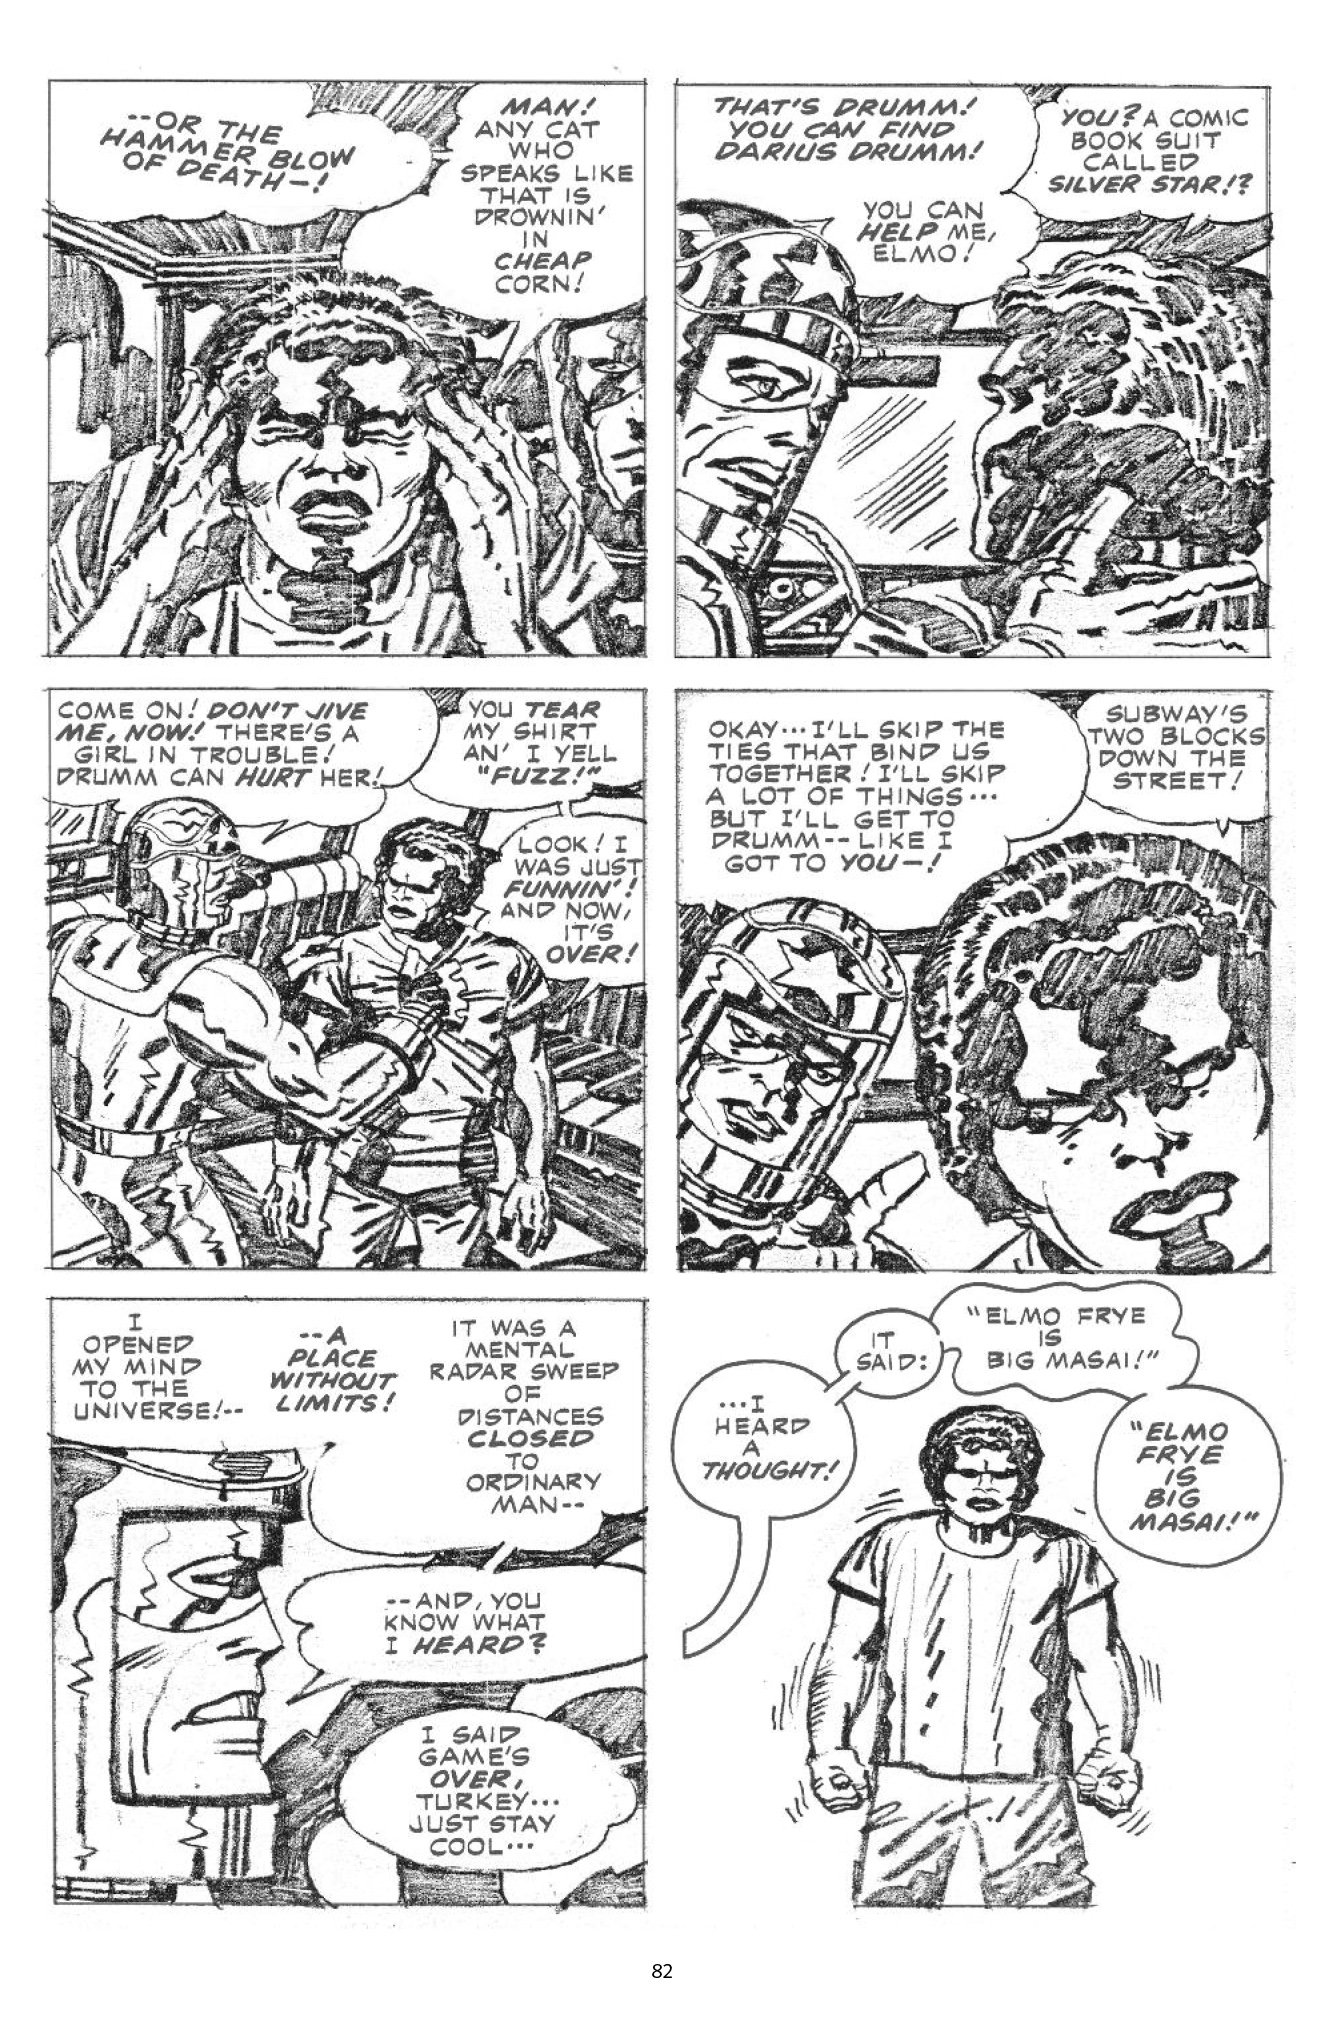 Read online Silver Star: Graphite Edition comic -  Issue # TPB (Part 1) - 81